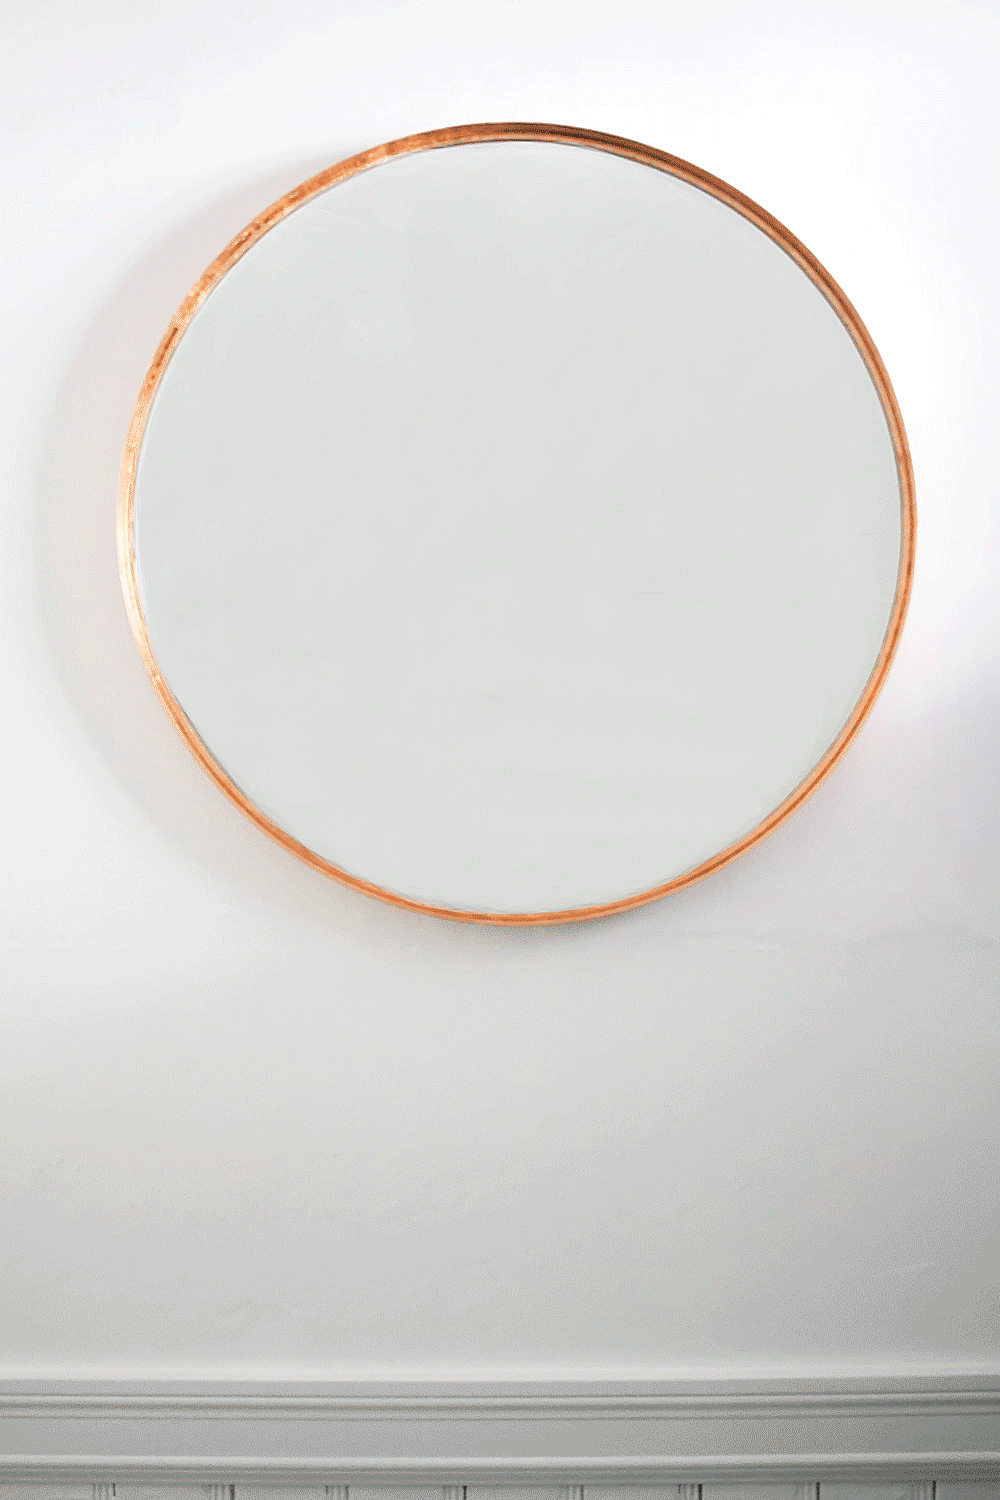 You can turn any plain mirror into a DIY copper mirror on a budget using just copper leaf and a paintbrush. The perfect inexpensive craft for a high-end look!